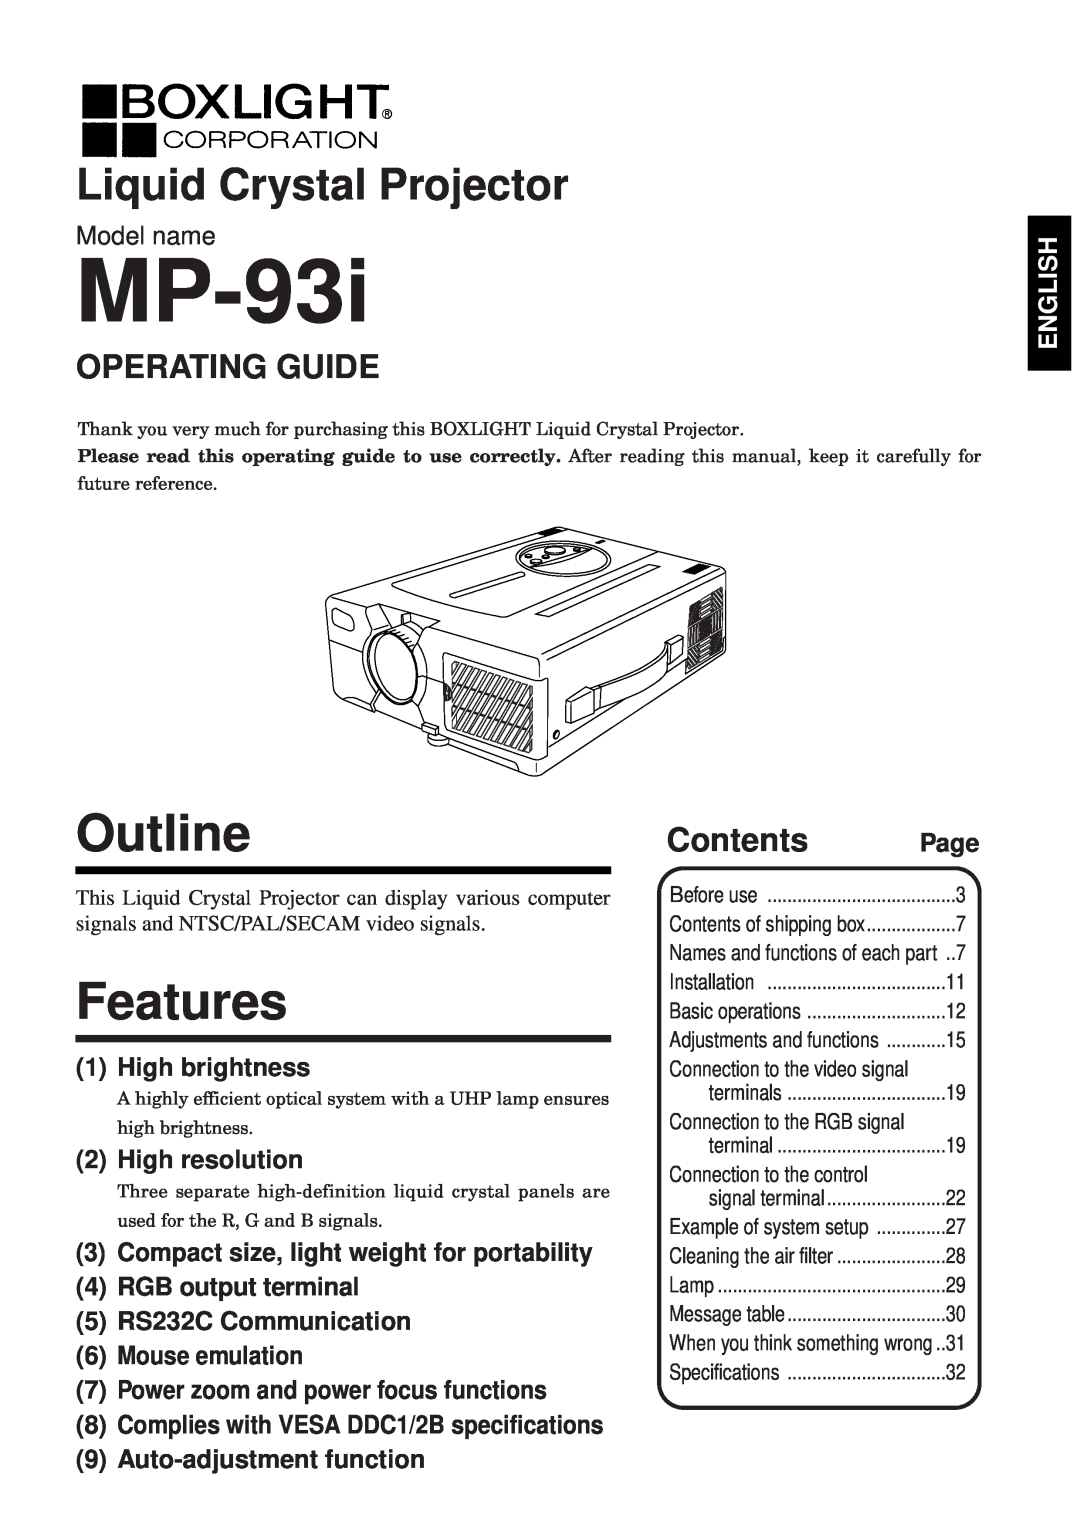 BOXLIGHT MP-93i specifications Outline, Features, Liquid Crystal Projector, Operating Guide, Contents, Model name, English 